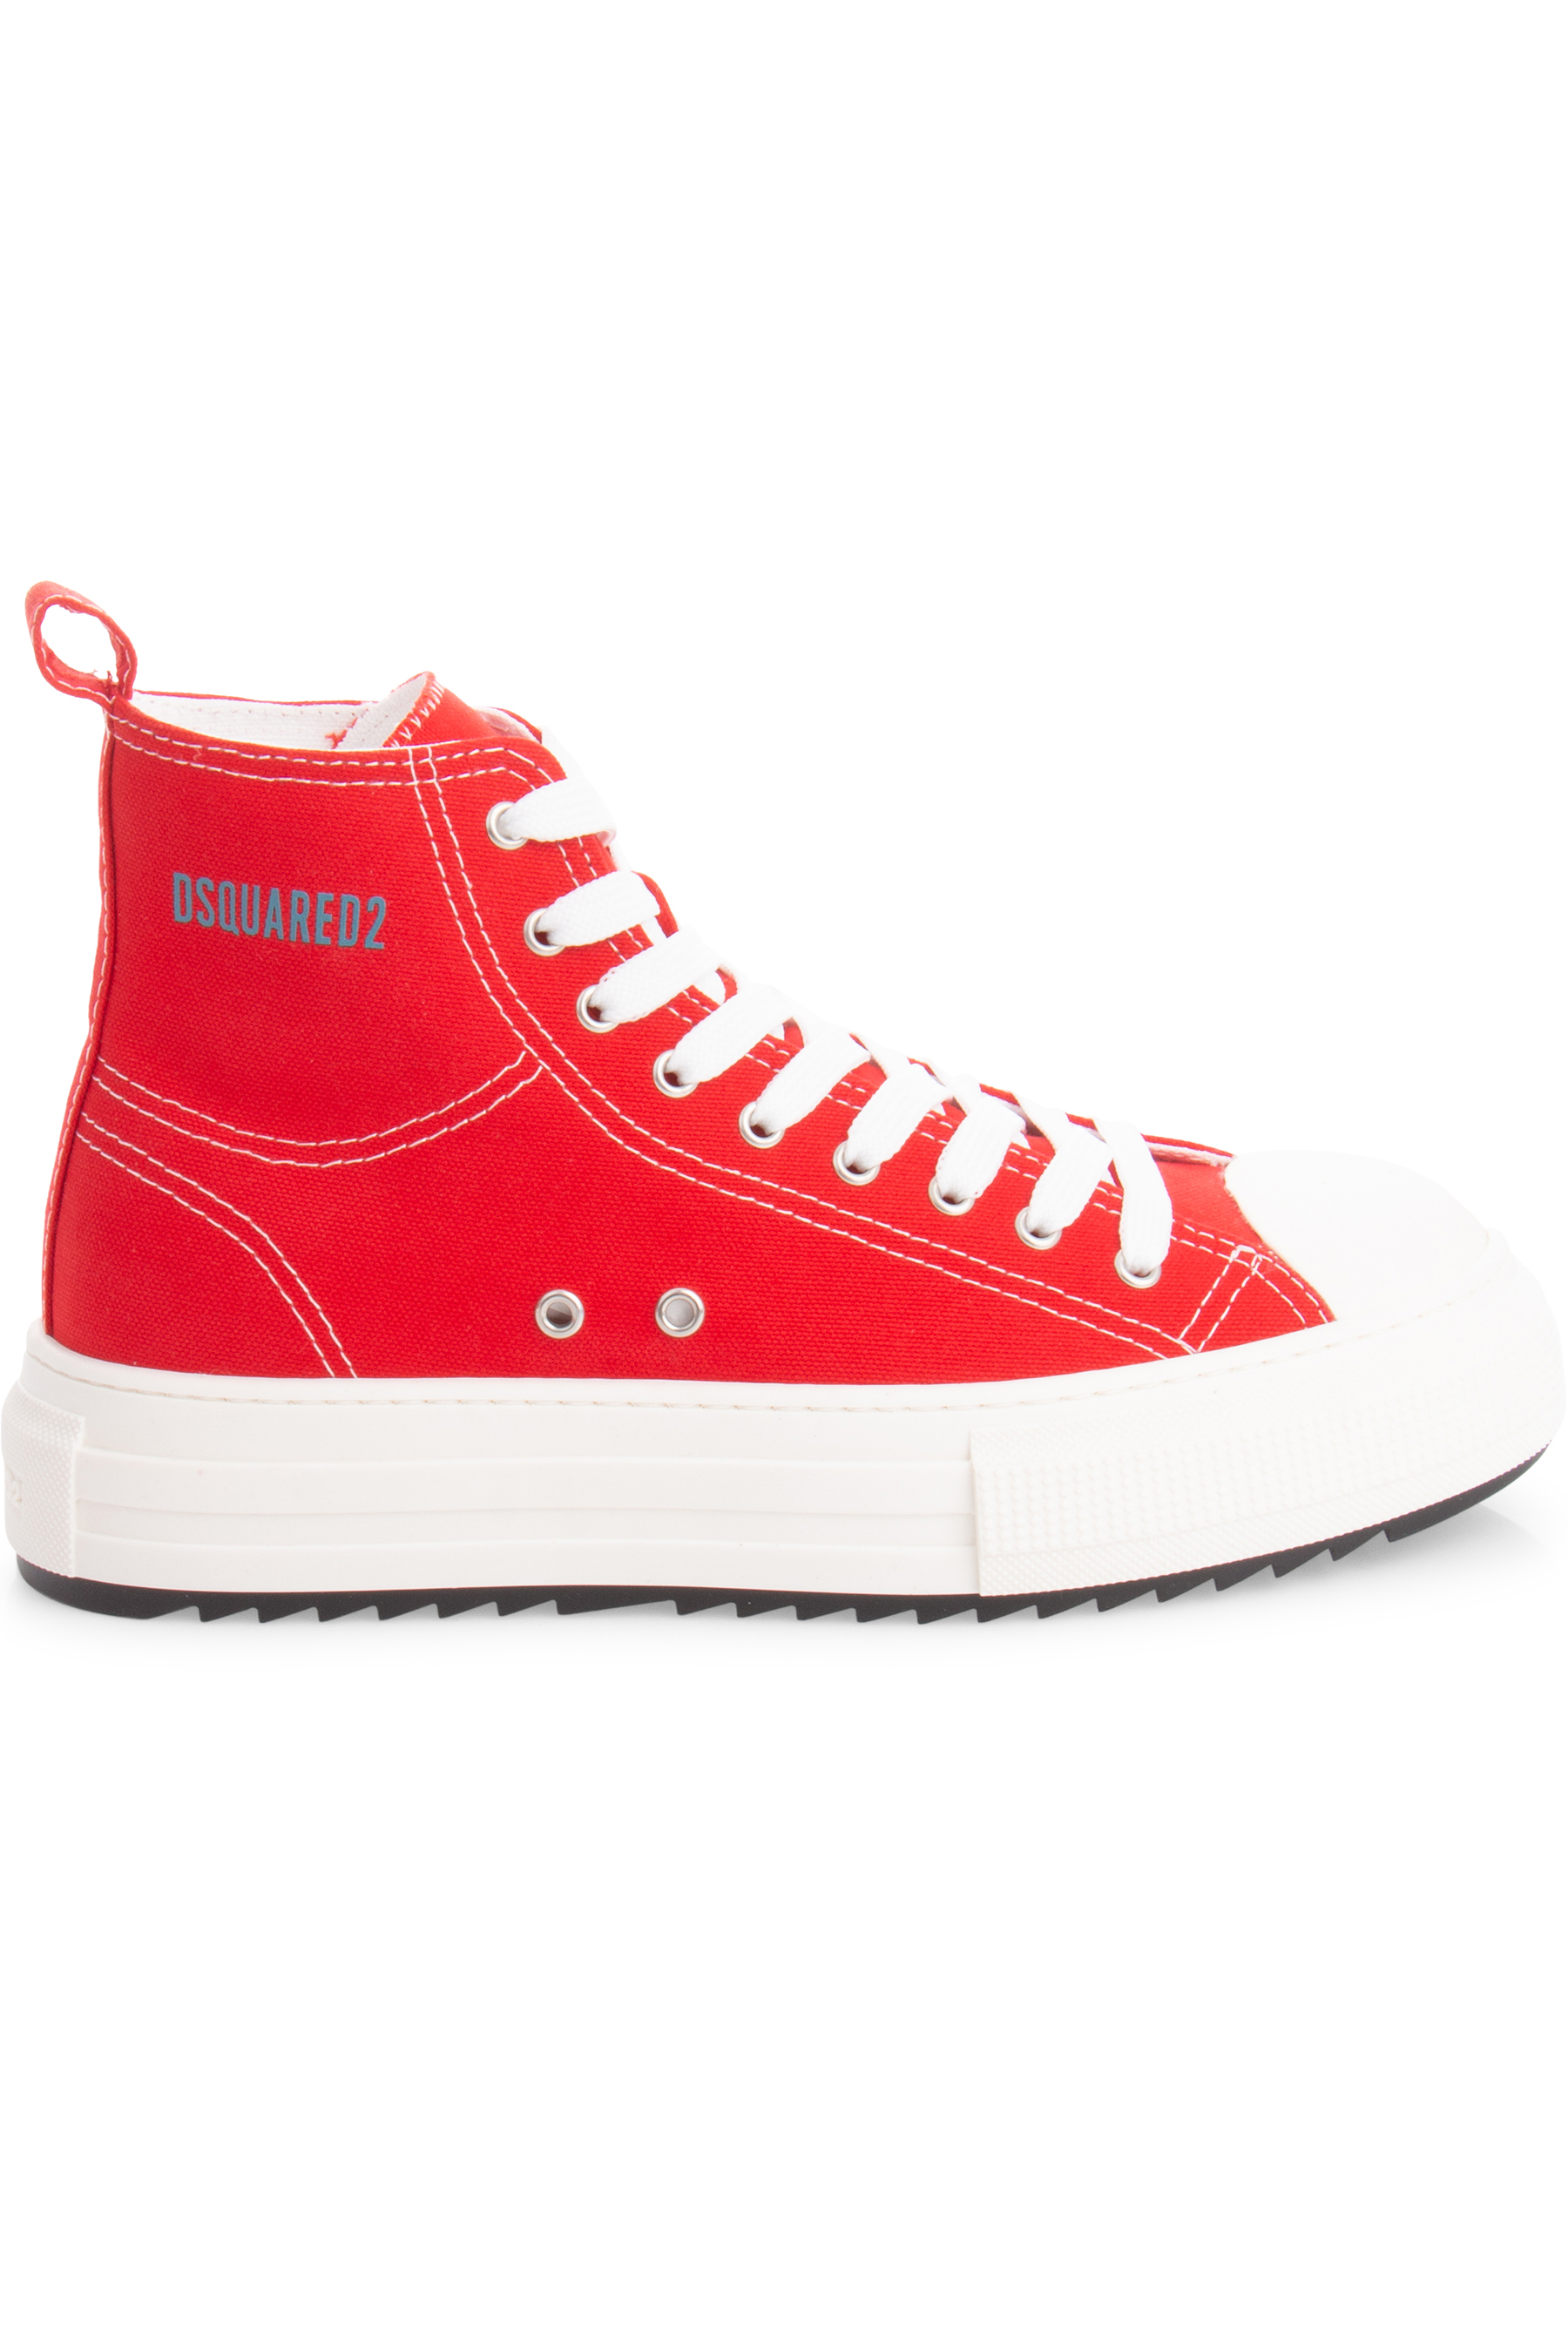 DSQUARED2 Canvas Sneakers Berlin | Sneakers | Sneakers & Casual Shoes ...